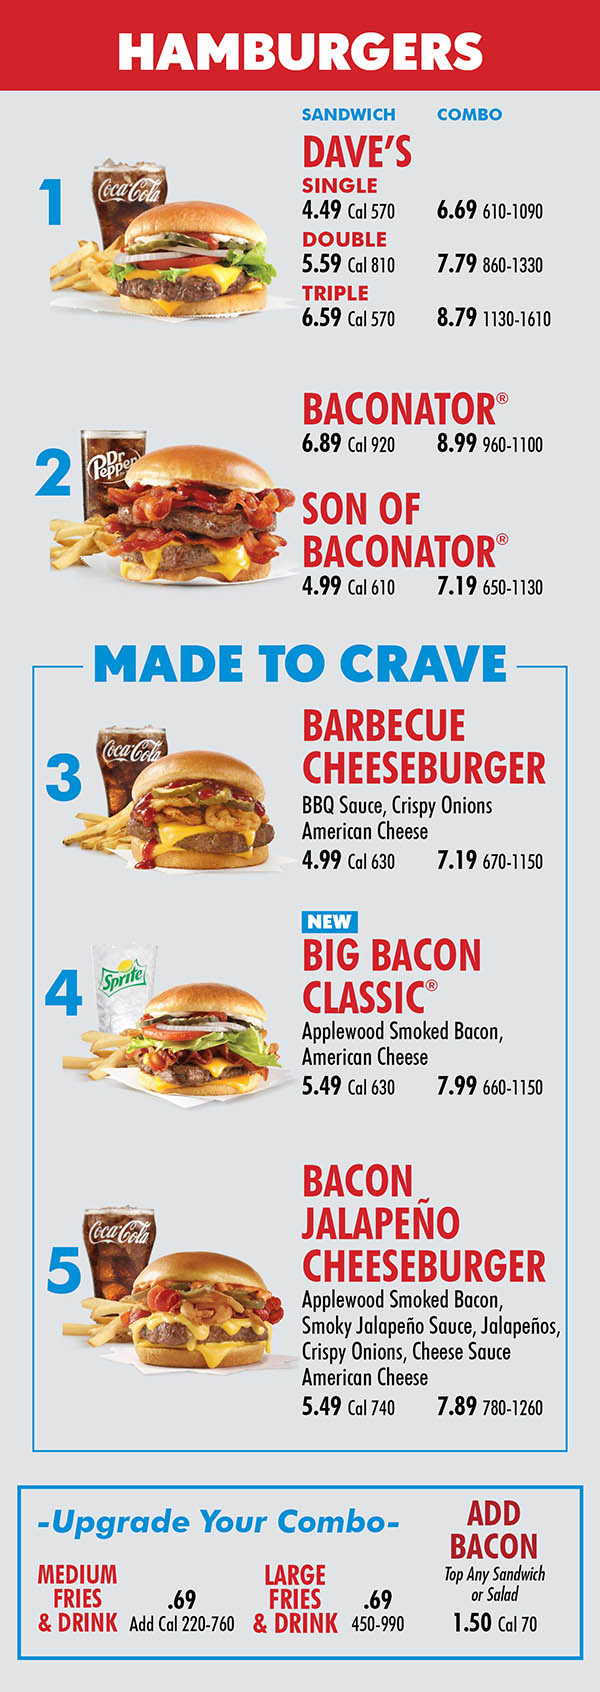 Wendy's Menu Lincoln NE Page 1
HAMBURGERS
SANDWICH COMBO
DAVE’S
SINGLE
4.49 Cal 570 6.69 610-1090
DOUBLE
5.59 Cal 810 7.79 860-1330
TRIPLE
6.59 Cal 570 8.79 1130-1610
BACONATOR®
6.89 Cal 920 8.99 960-1100
SON OF
BACONATOR®
4.99 Cal 610 7.19 650-1130
BARBECUE
CHEESEBURGER
BBQ Sauce, Crispy Onions
American Cheese
4.99 Cal 630 7.19 670-1150
BIG BACON
CLASSIC®
Applewood Smoked Bacon,
American Cheese
5.49 Cal 630 7.99 660-1150
BACON
JALAPEÑO
CHEESEBURGER
Applewood Smoked Bacon,
Smoky Jalapeño Sauce, Jalapeños,
Crispy Onions, Cheese Sauce
American Cheese
5.49 Cal 740 7.89 780-1260
1
2
MADE TO CRAVE
3
4
5
-Upgrade Your Combo-
ADD
BACON
MEDIUM
FRIES
& DRINK
LARGE
FRIES
& DRINK
.69
Add Cal 220-760
.69
450-990
Top Any Sandwich or Salad
1.50 Cal 70